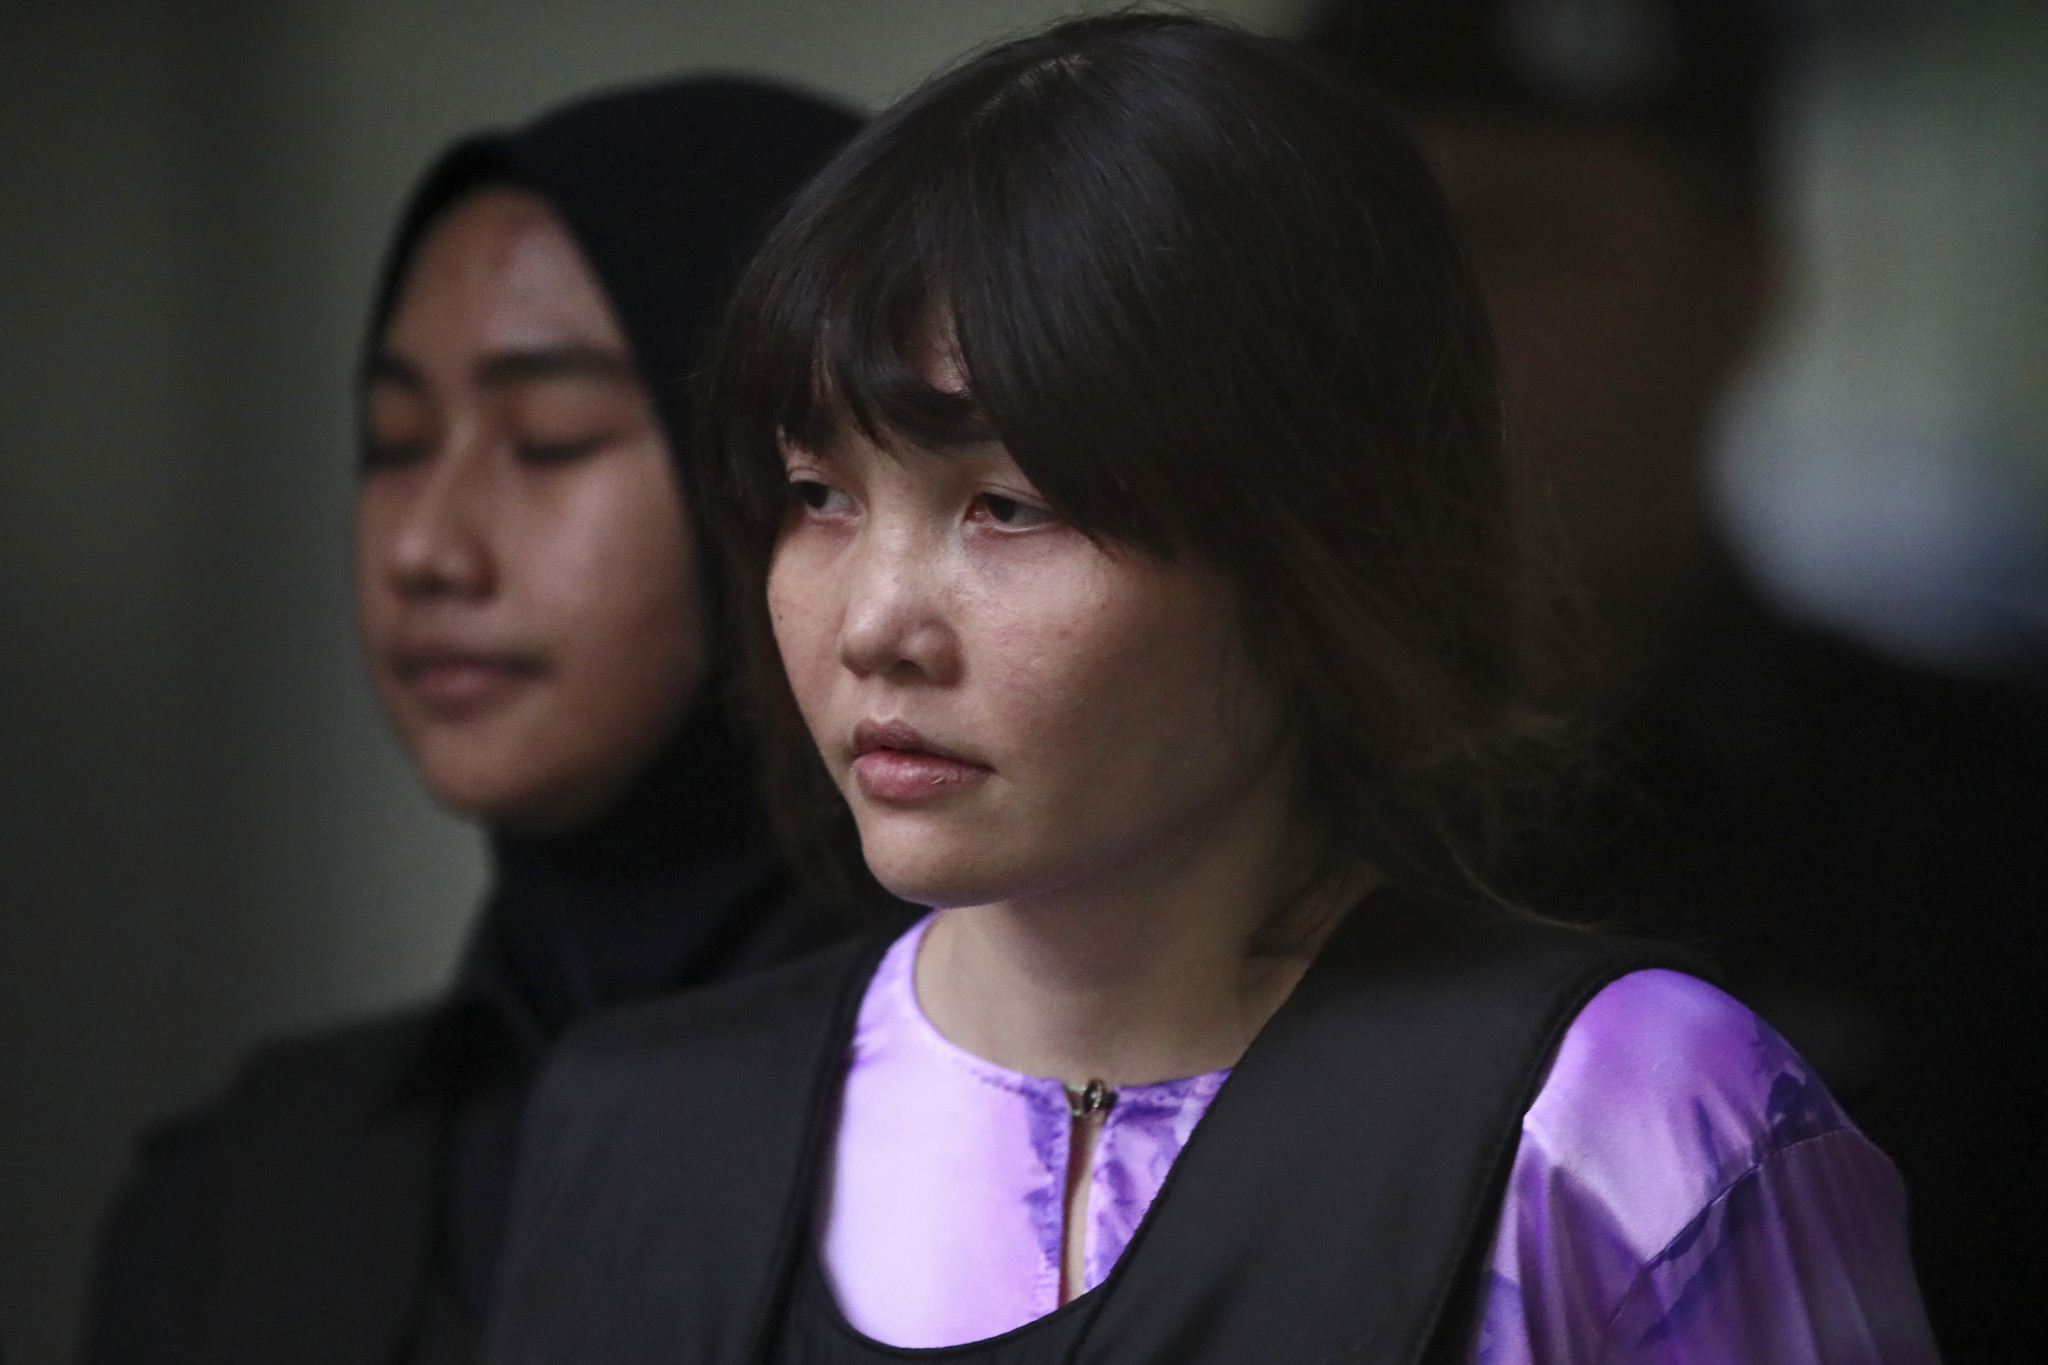 Video of fatal attack on Kim Jong Nam shown at women's trial - Chicago Tribune